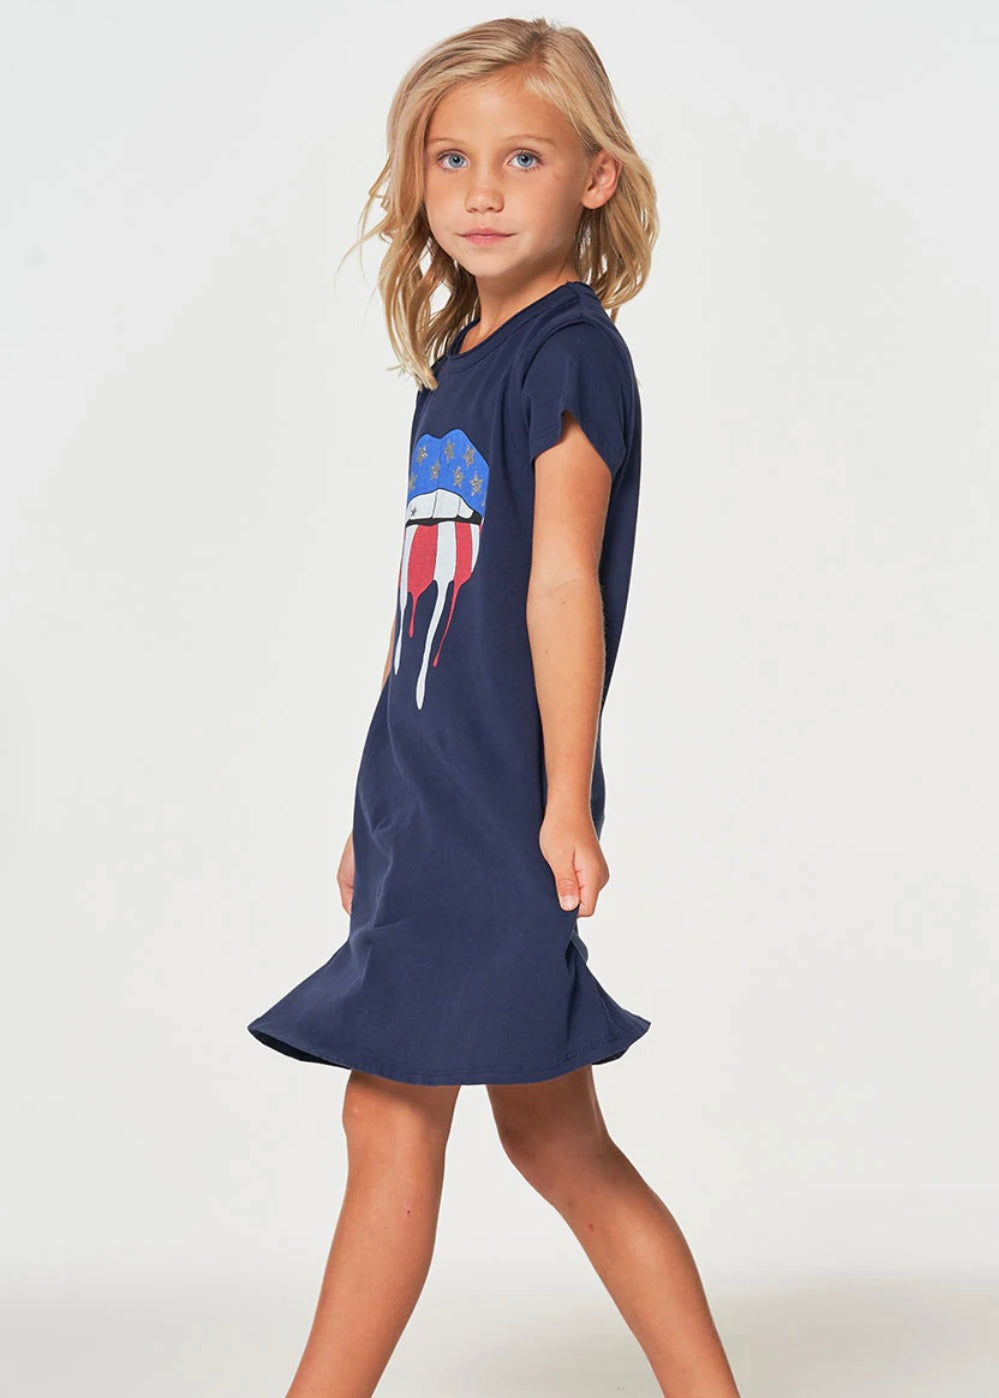 Chaser Patriot Lips Tee Dress